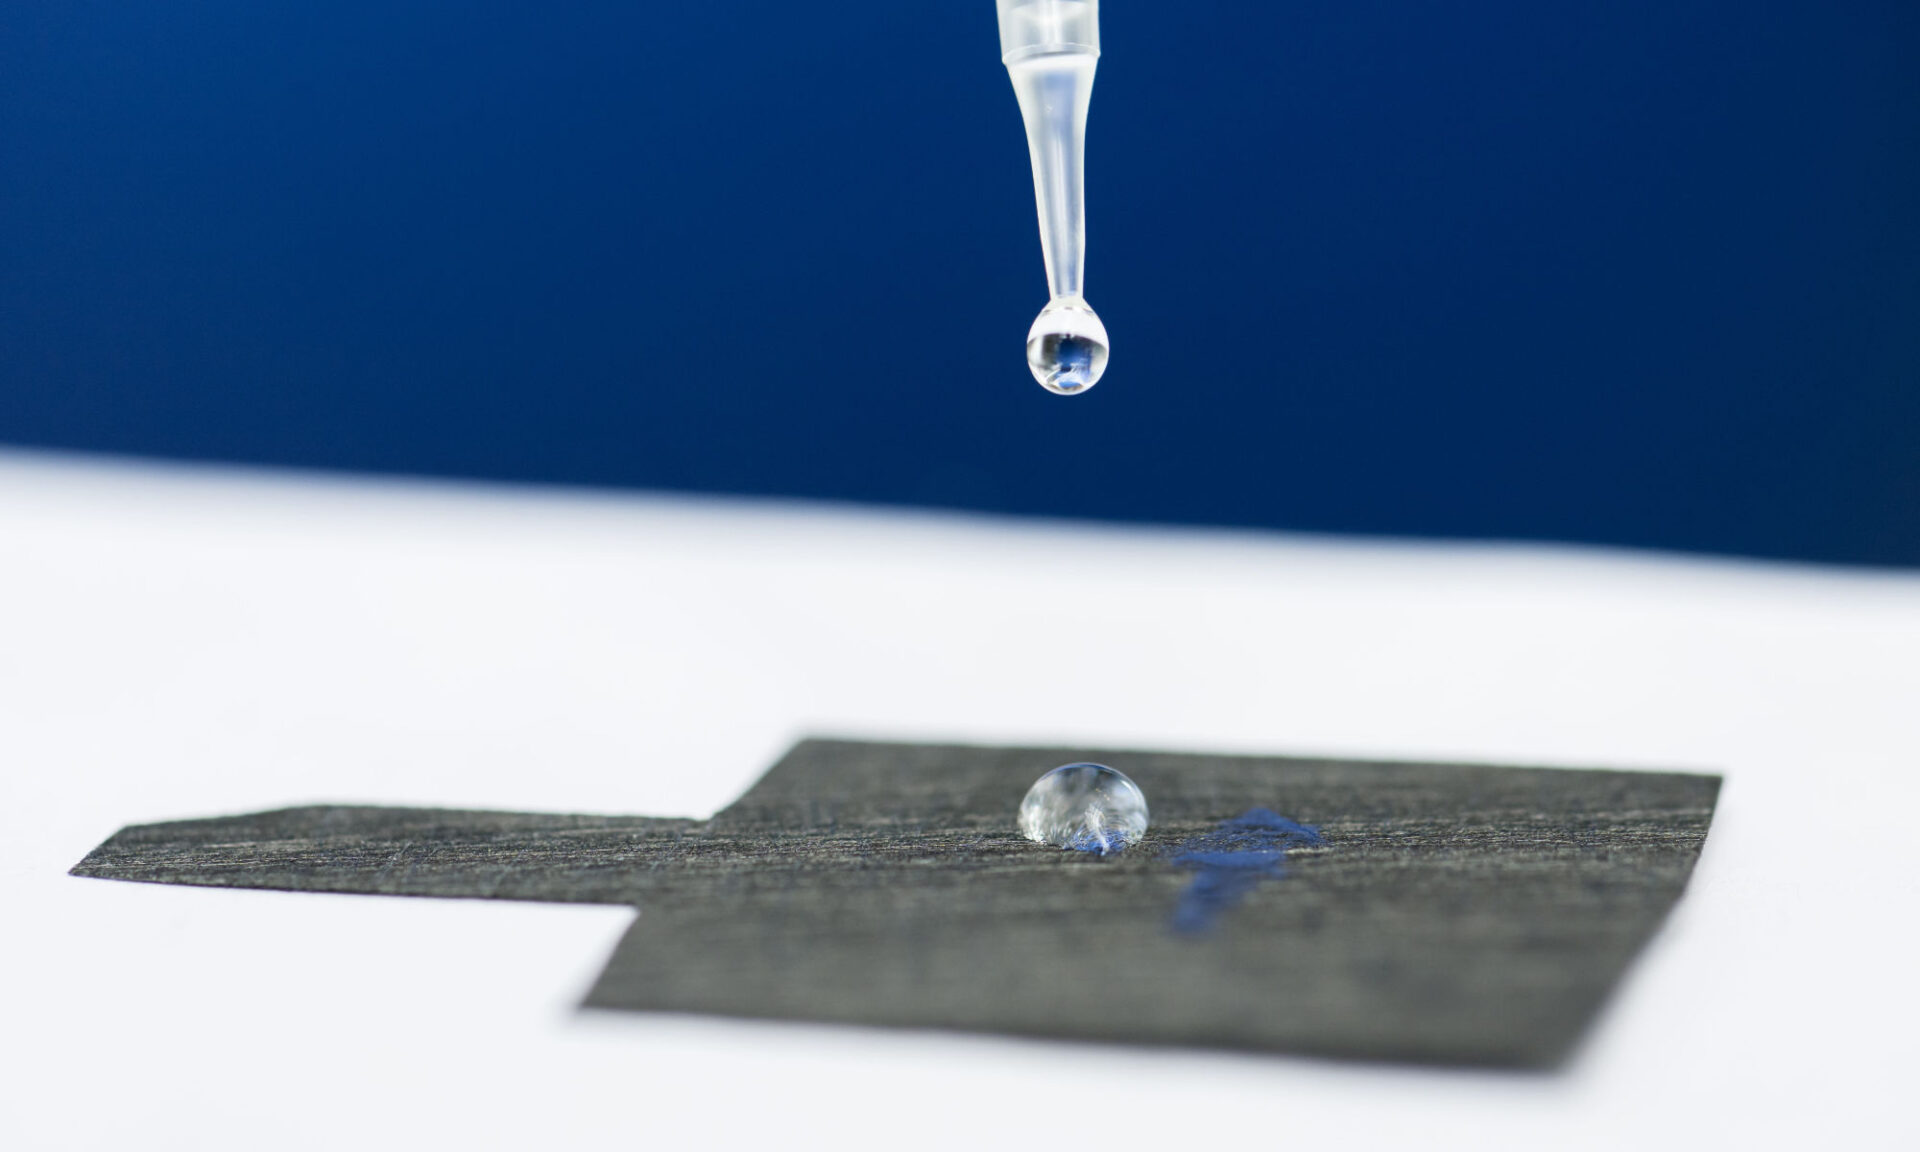 Pipette releasing a water droplet atop carbon paper to illustrate pfas chemical remediation.